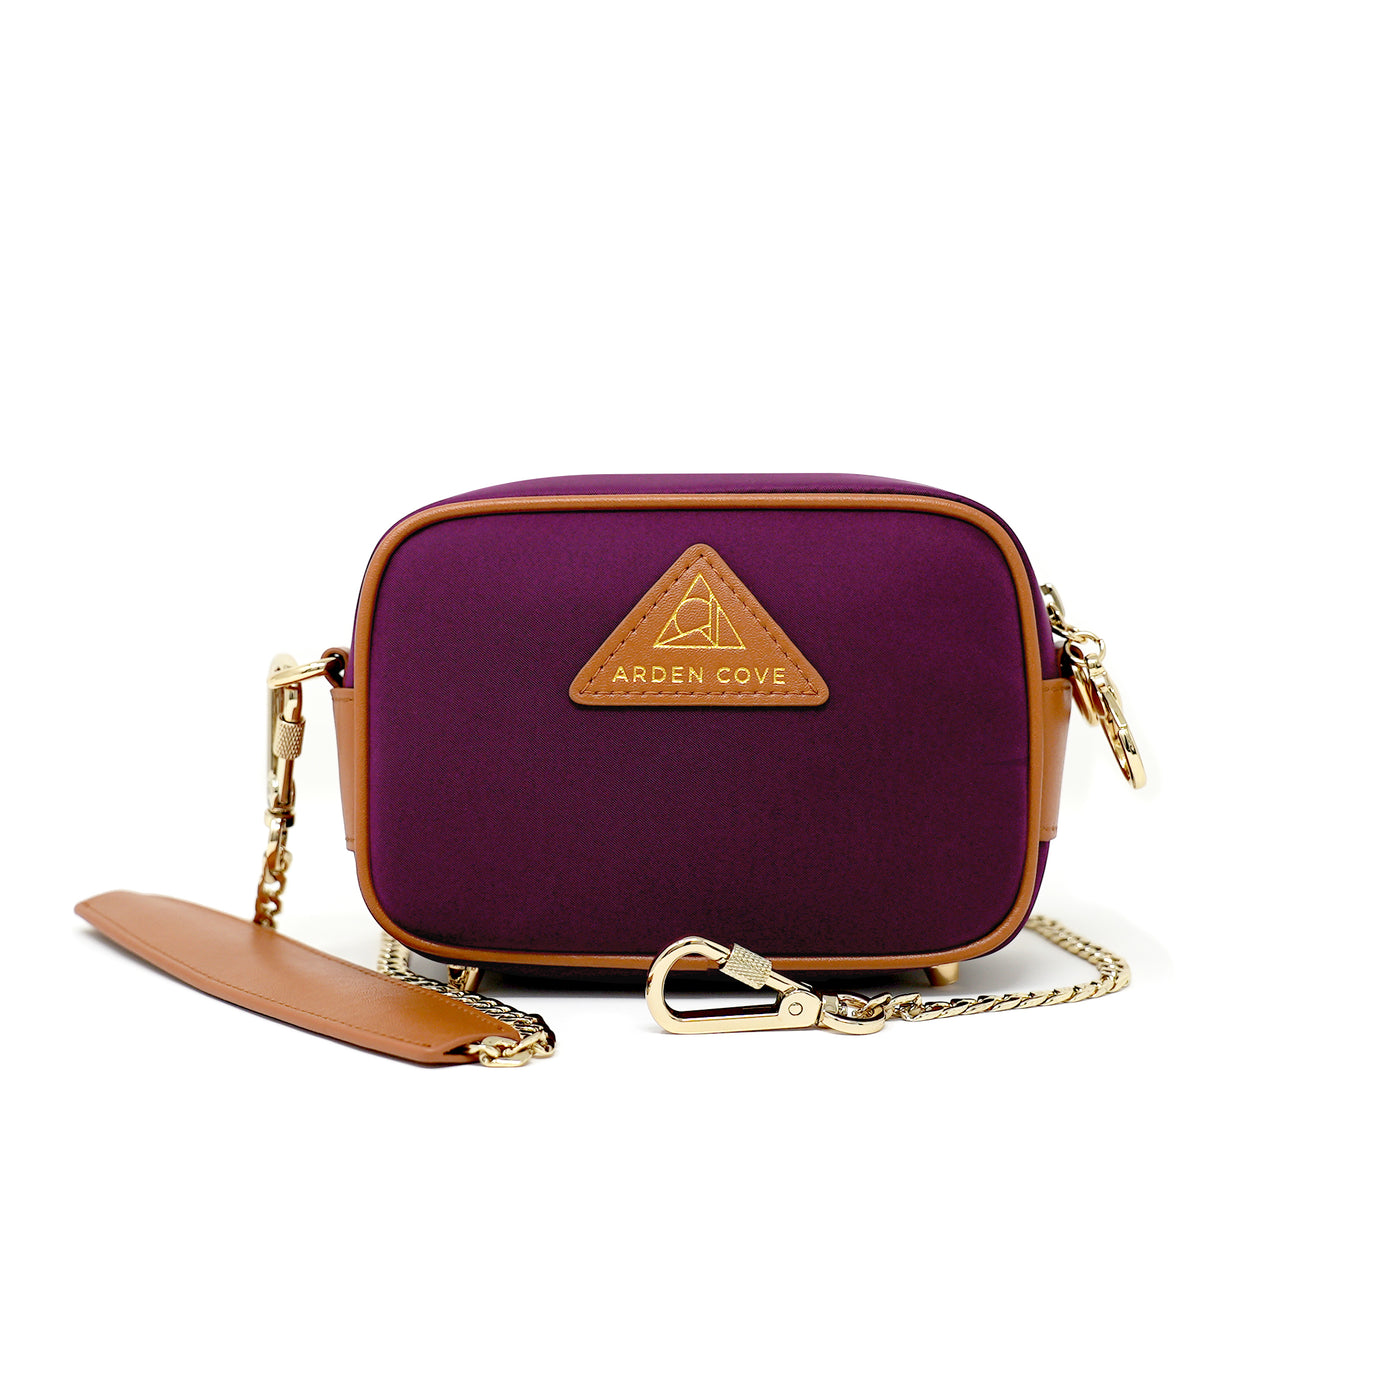 Anti-theft Water-resistant Travel Crossbody - Crissy Mini Crossbody in Maroon Gold with slash-resistant chain & locking clasps straps - front view - Arden Cove